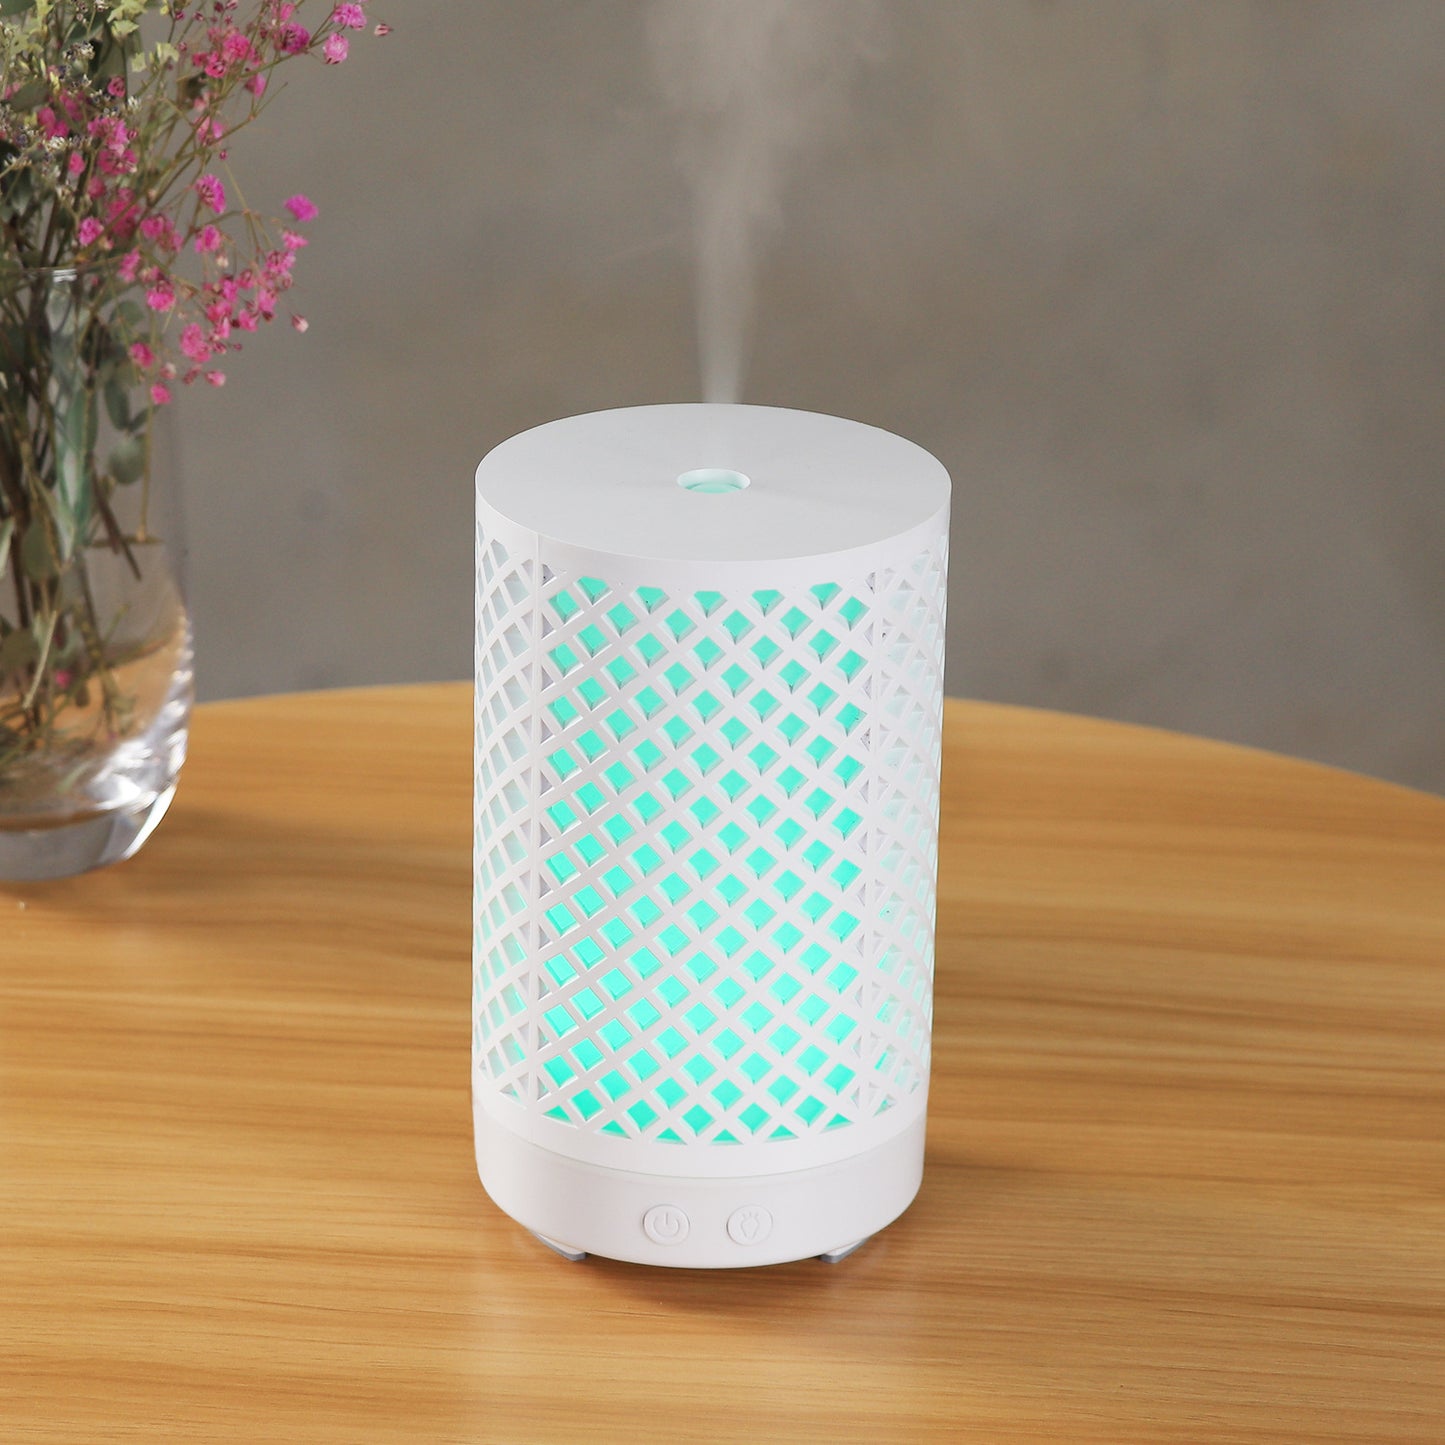 Hollow aroma diffuser ultrasonic atomizer household colorful night light desktop essential oil aromatherapy humidifier